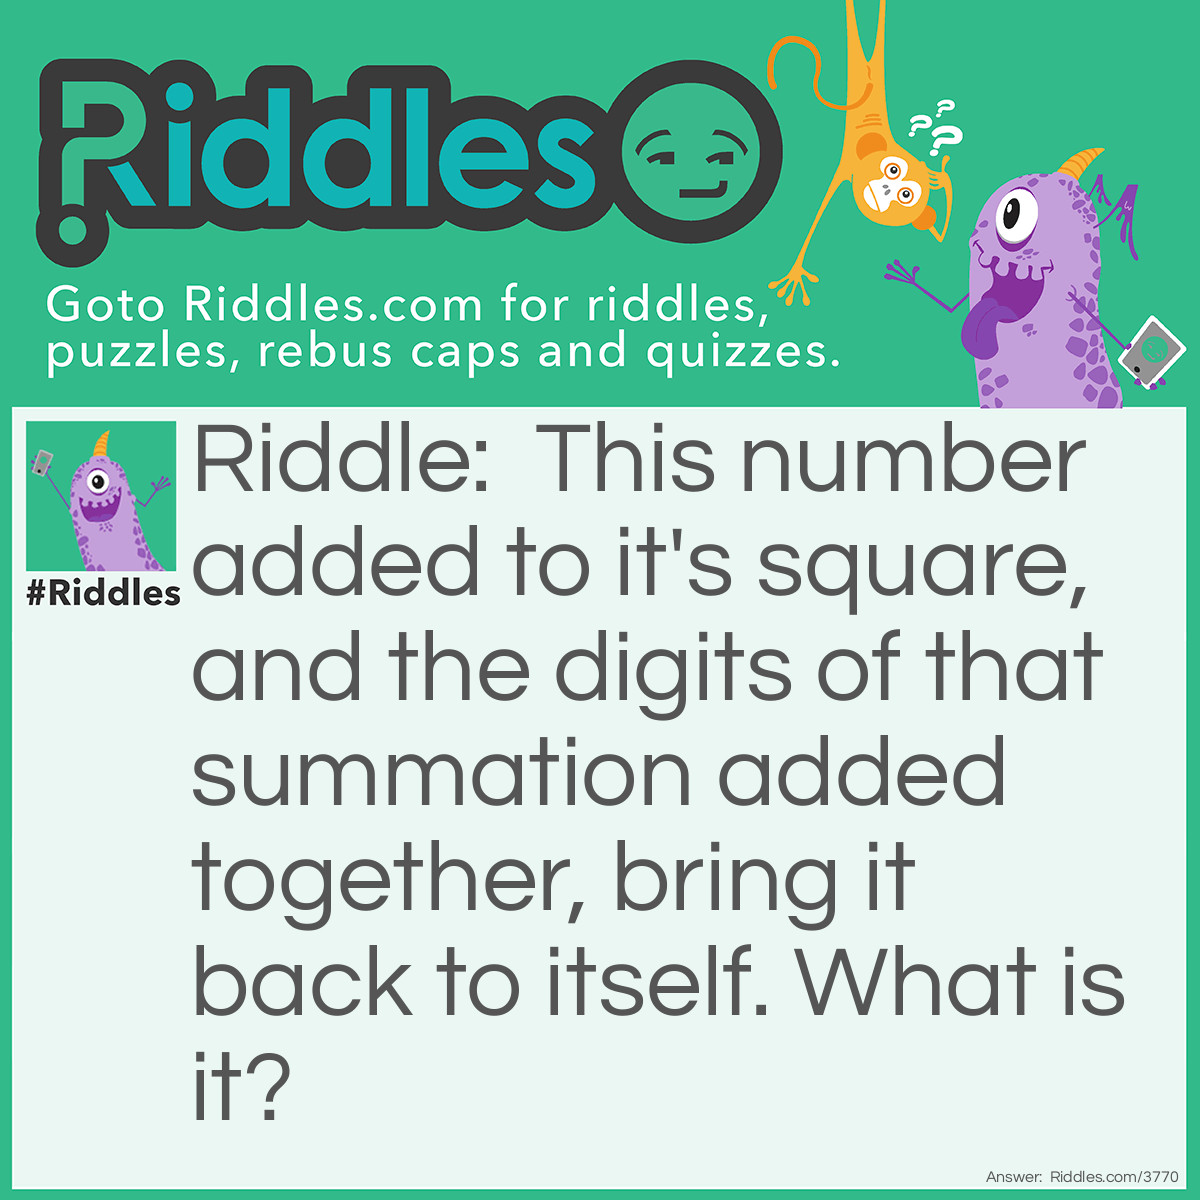 Riddle: This number added to it's square, and the digits of that summation added together, bring it back to itself. What is it? Answer: 3. 3 squared is 9. 3+9=12. Take the two digits of the summation and add them; 1+2=3. In short; 3-9-12-3. This can also work with the number 0 and 9.